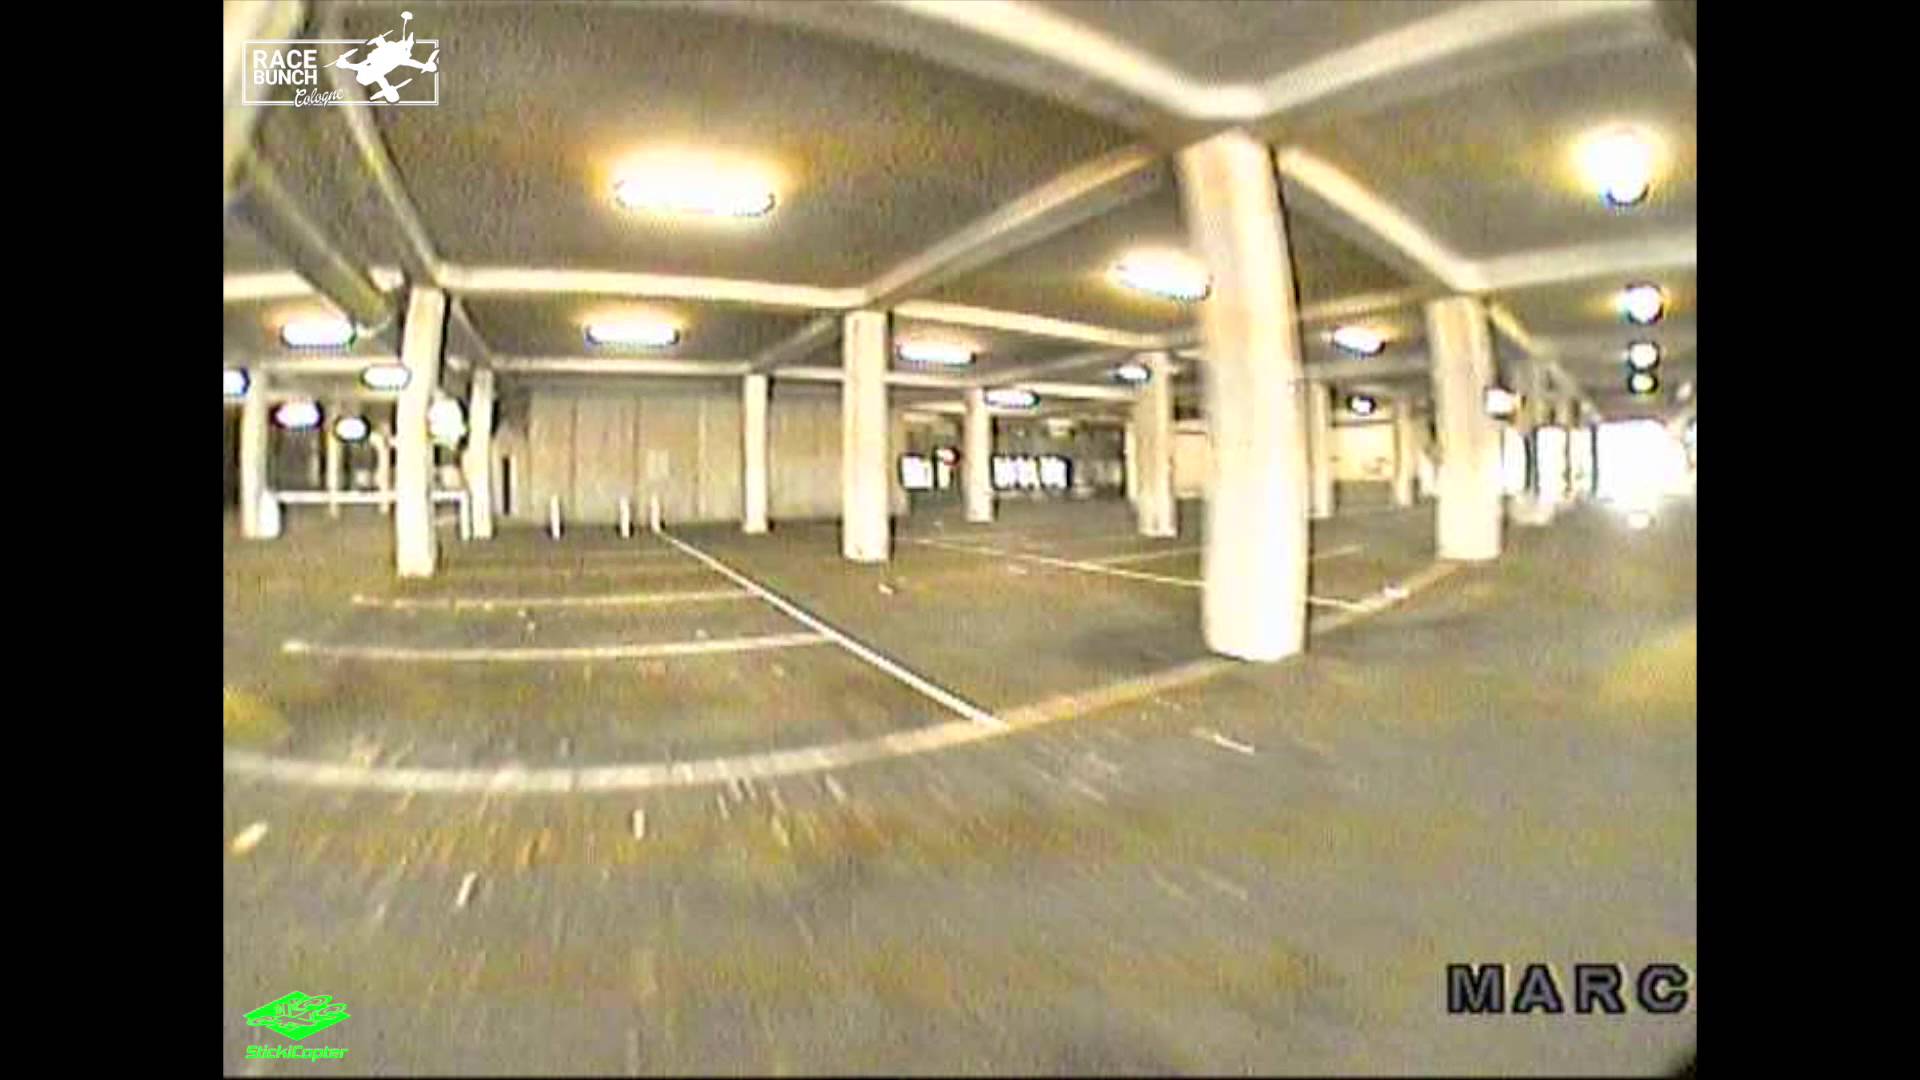 Indoor FPV Drone Racing Raw DVR Capture Race Bunch Cologne